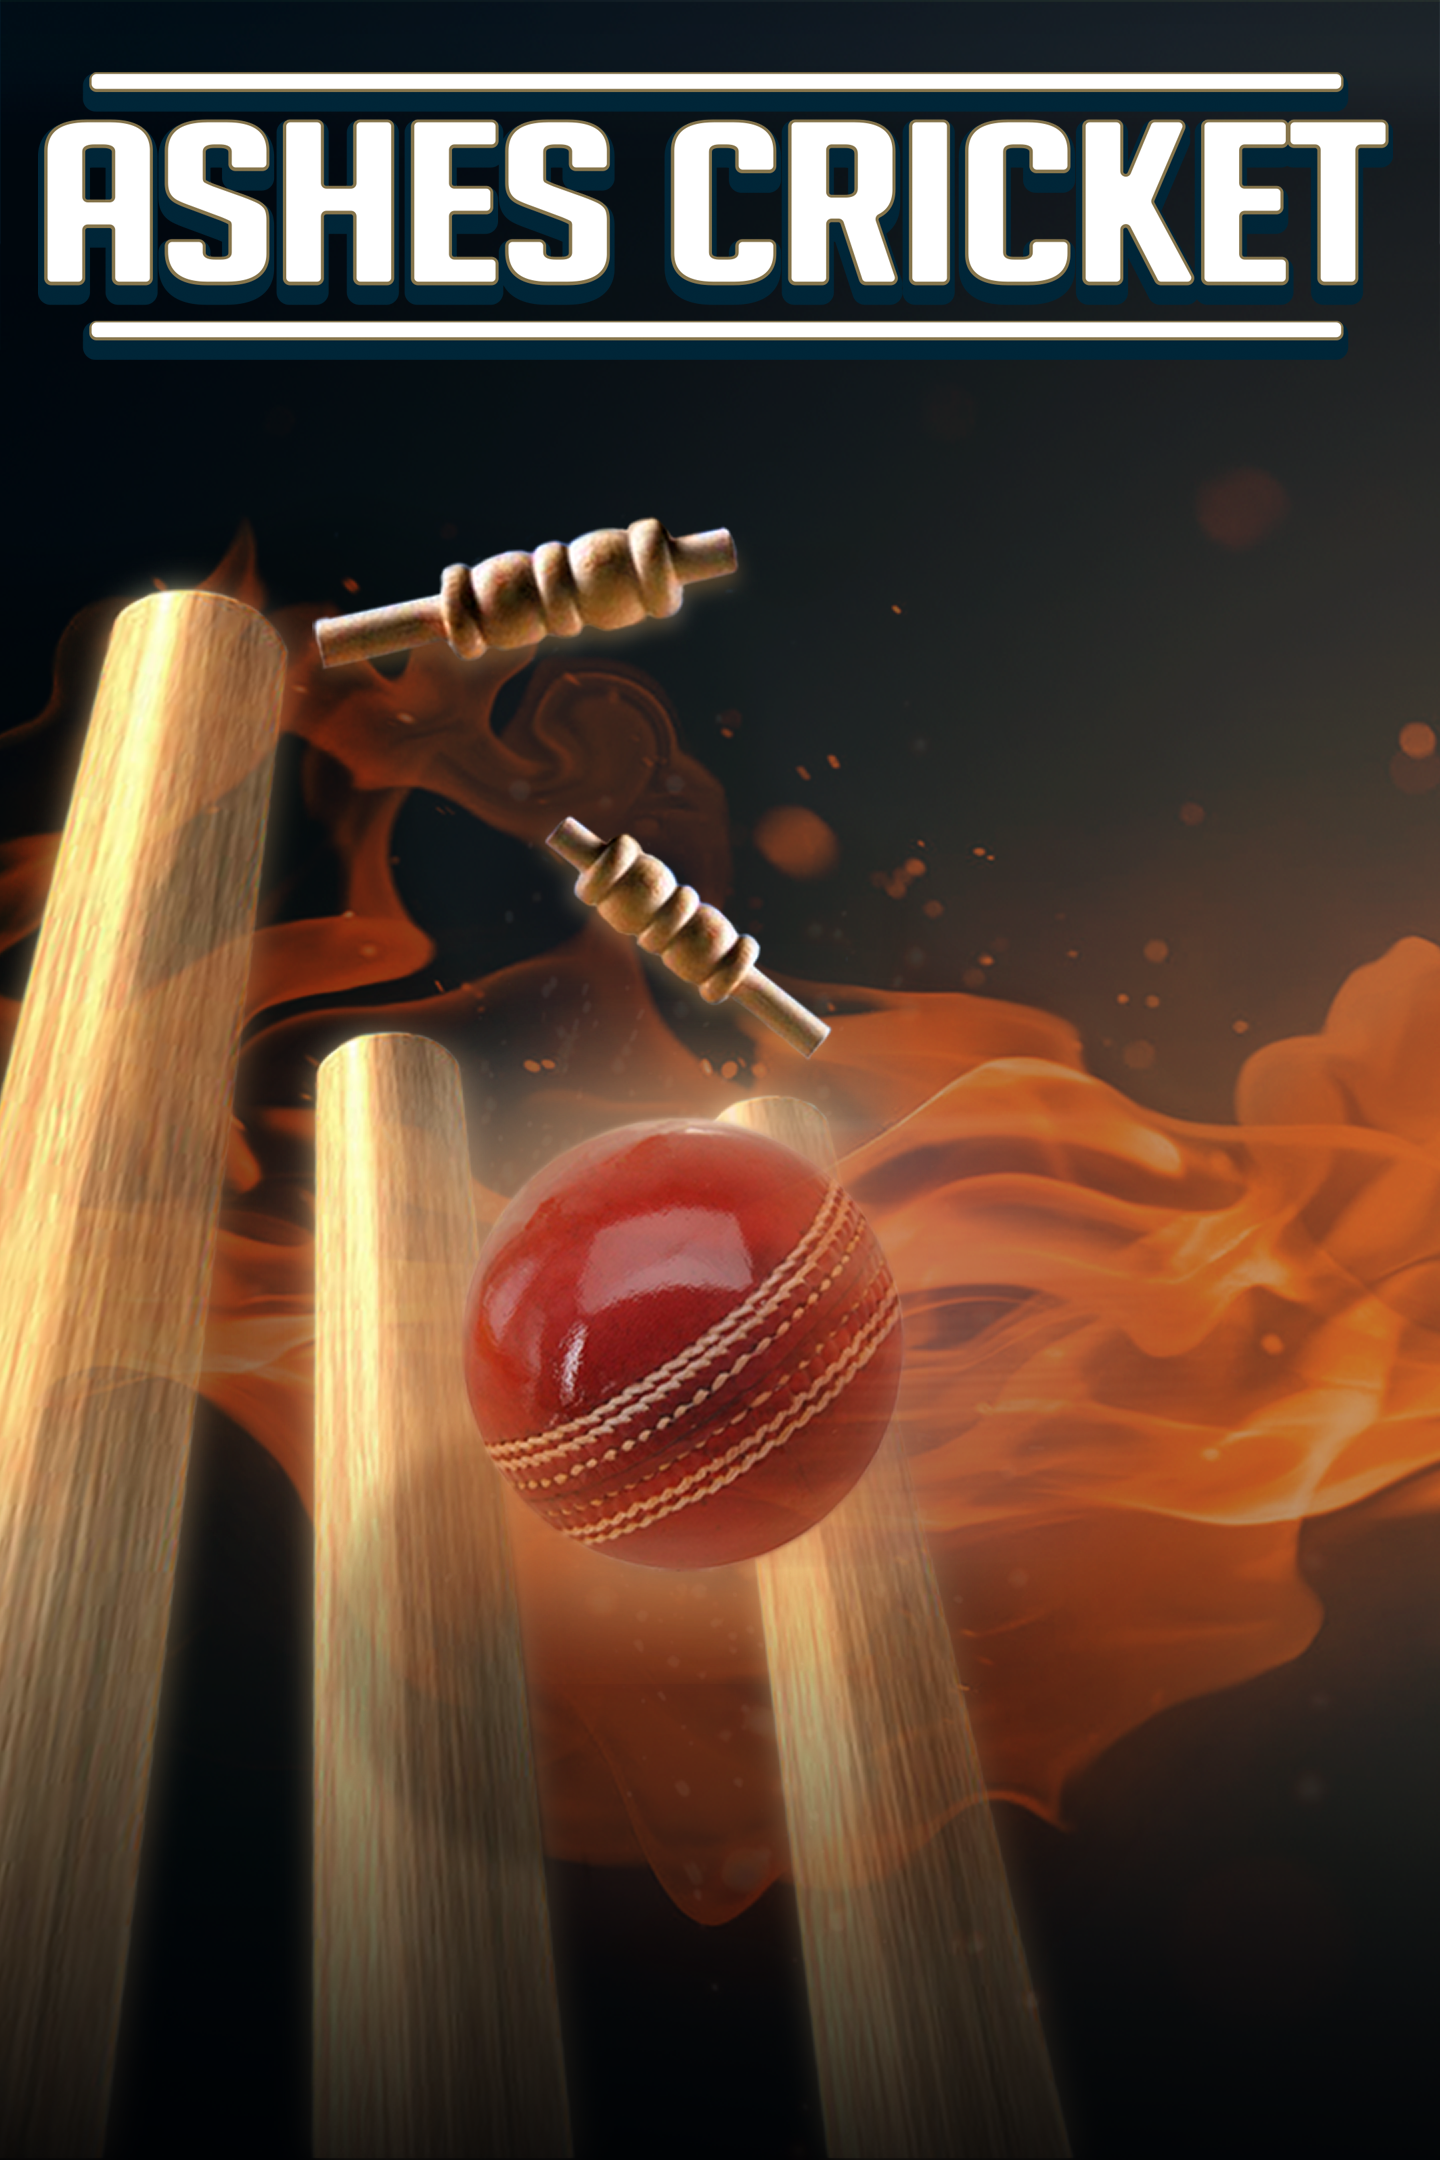 Image of Ashes Cricket